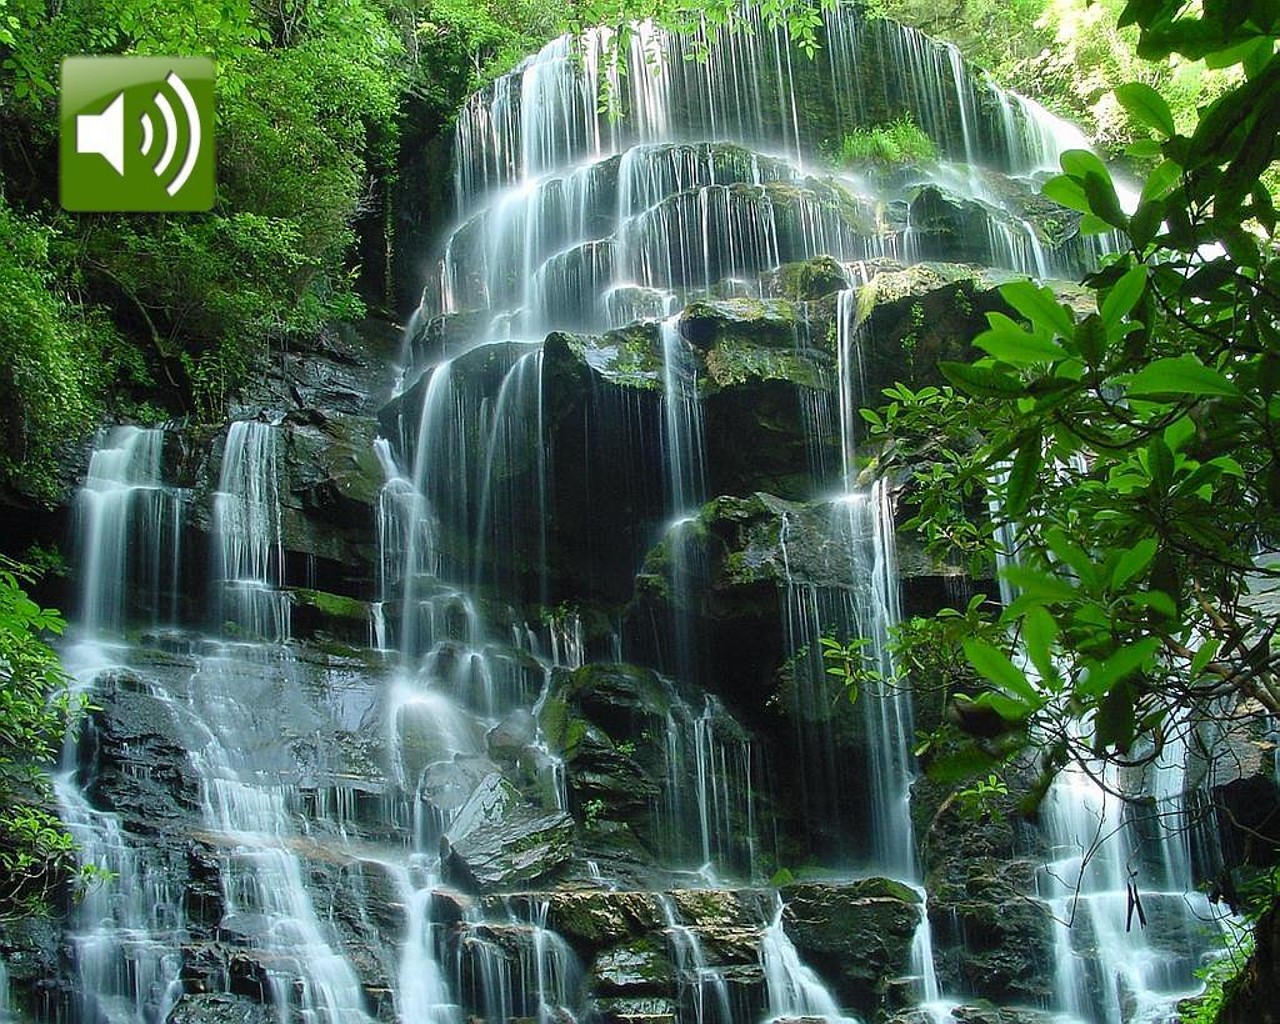 50+ Live Waterfalls Wallpapers with Sound on WallpaperSafari